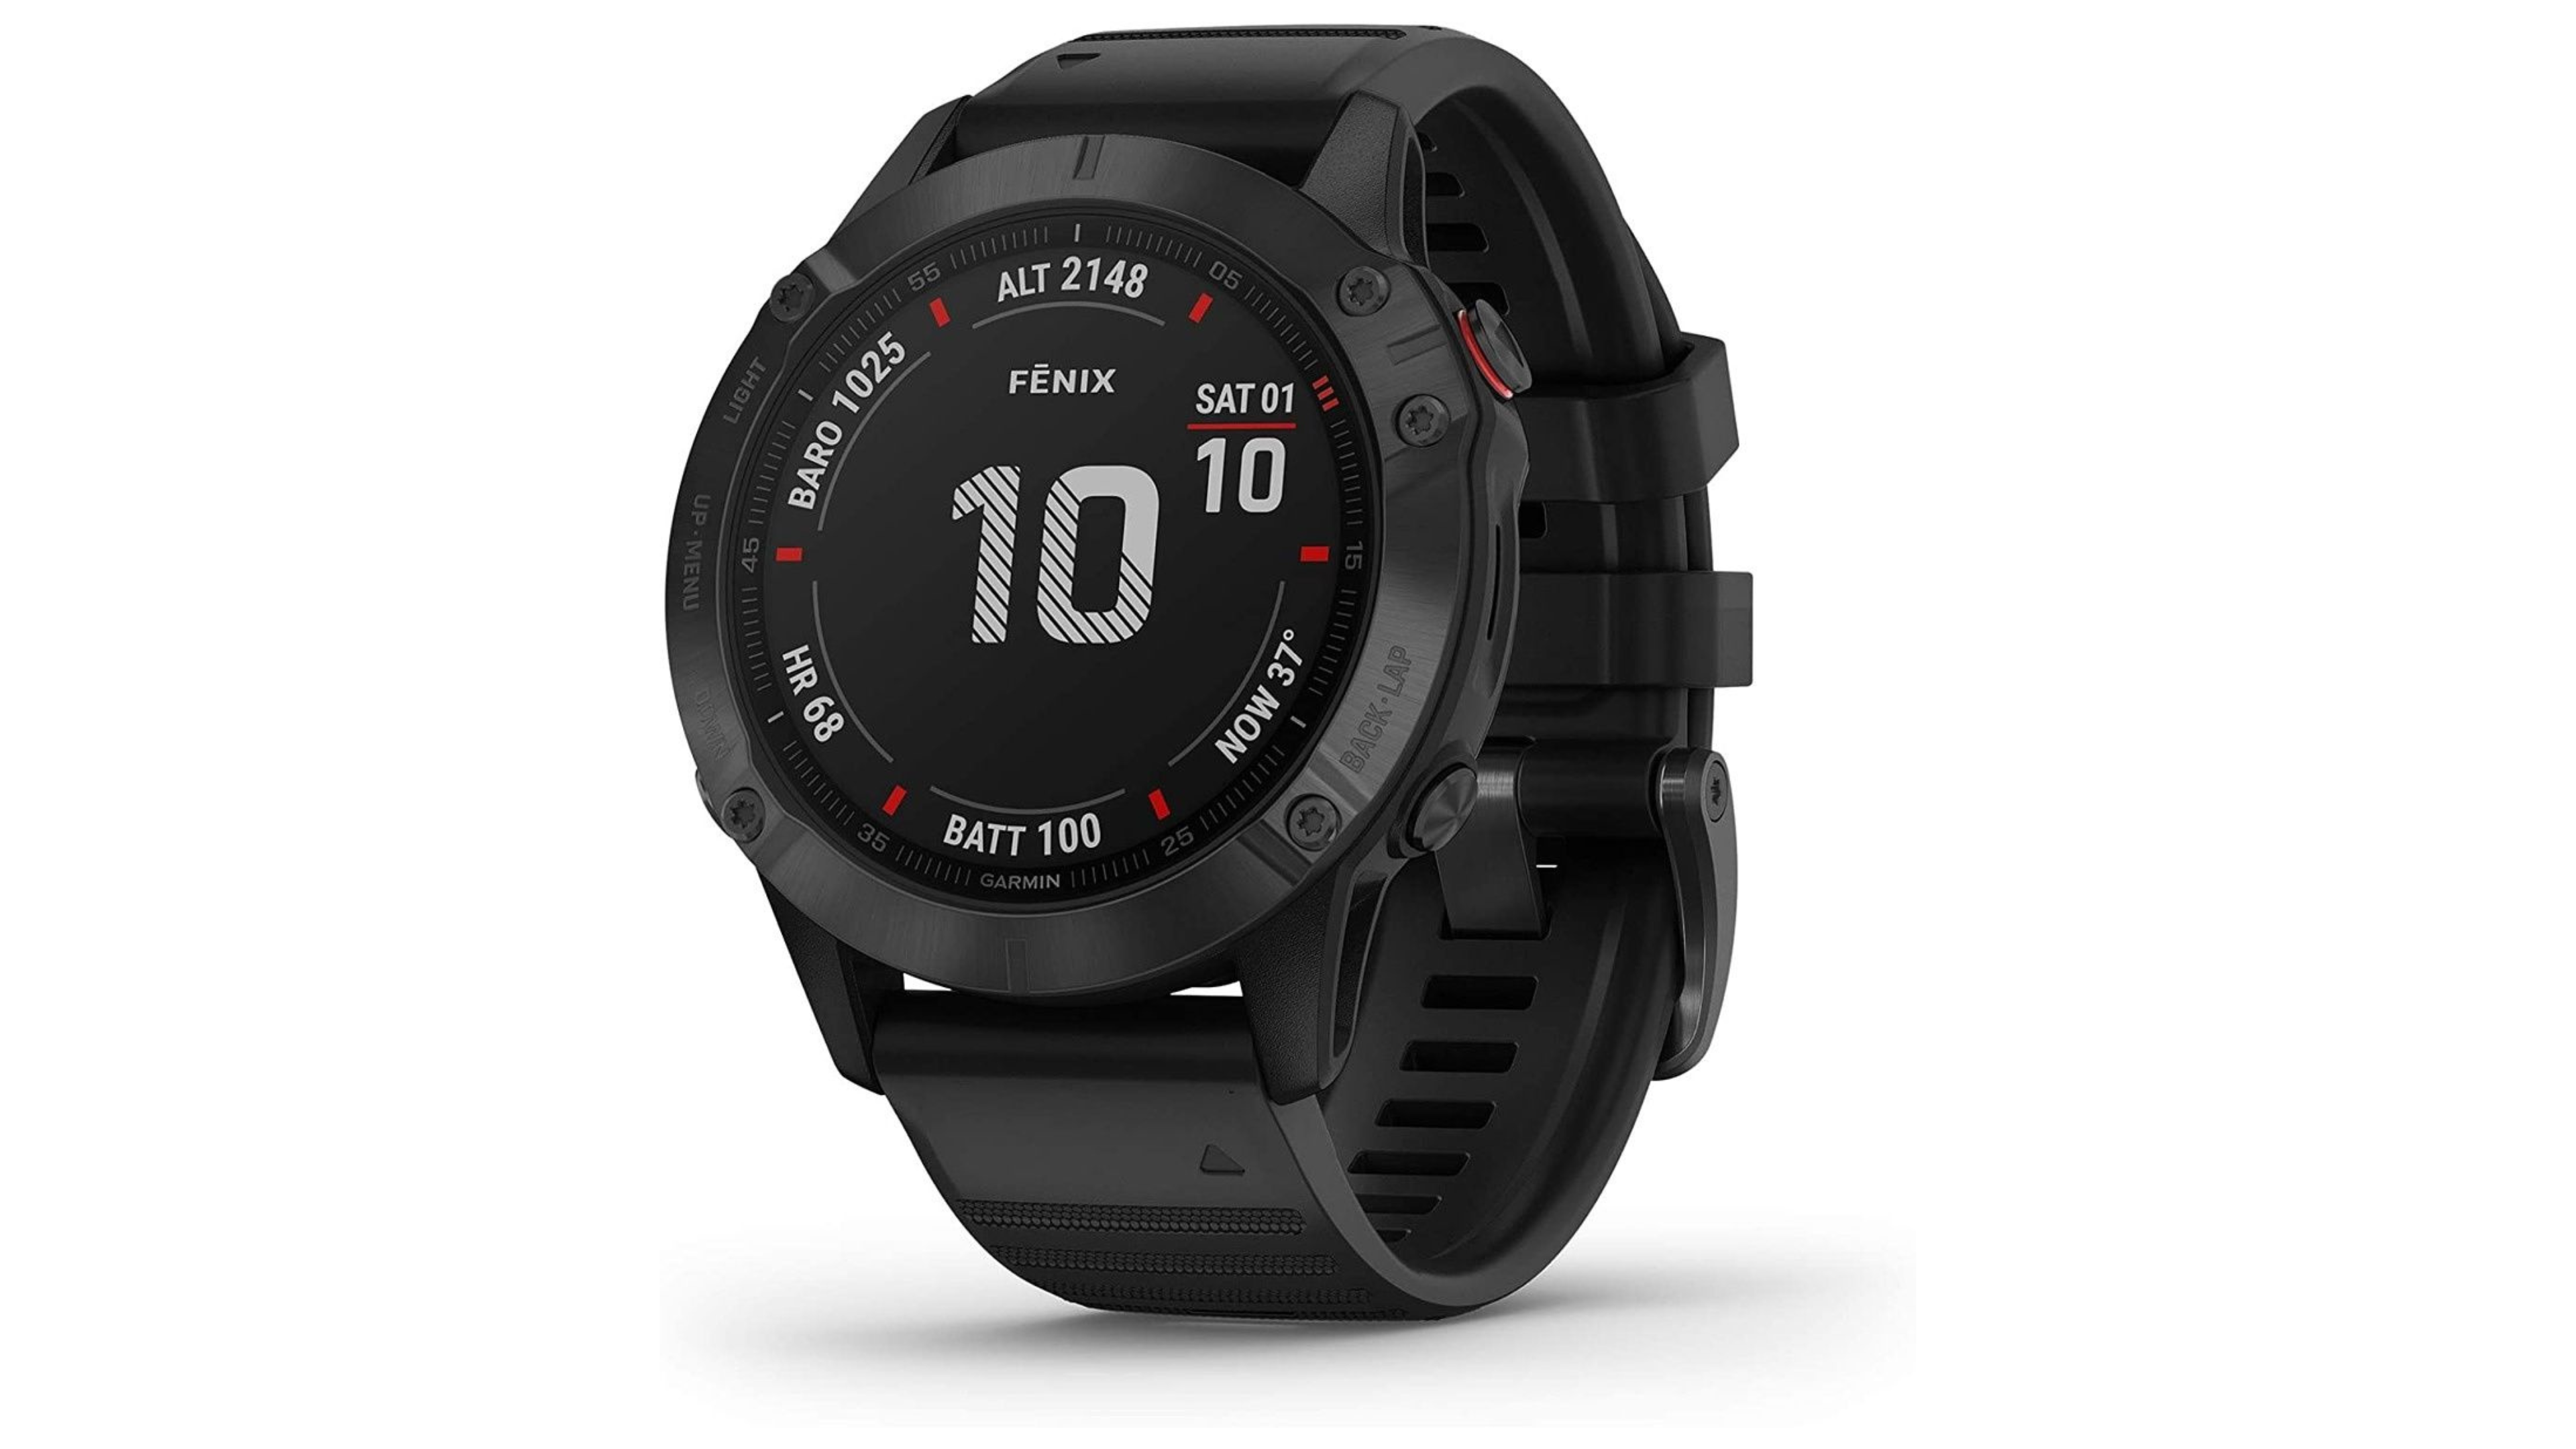 Garmin's Fenix 6 Pro is now 50% off, dropping to its lowest price ever